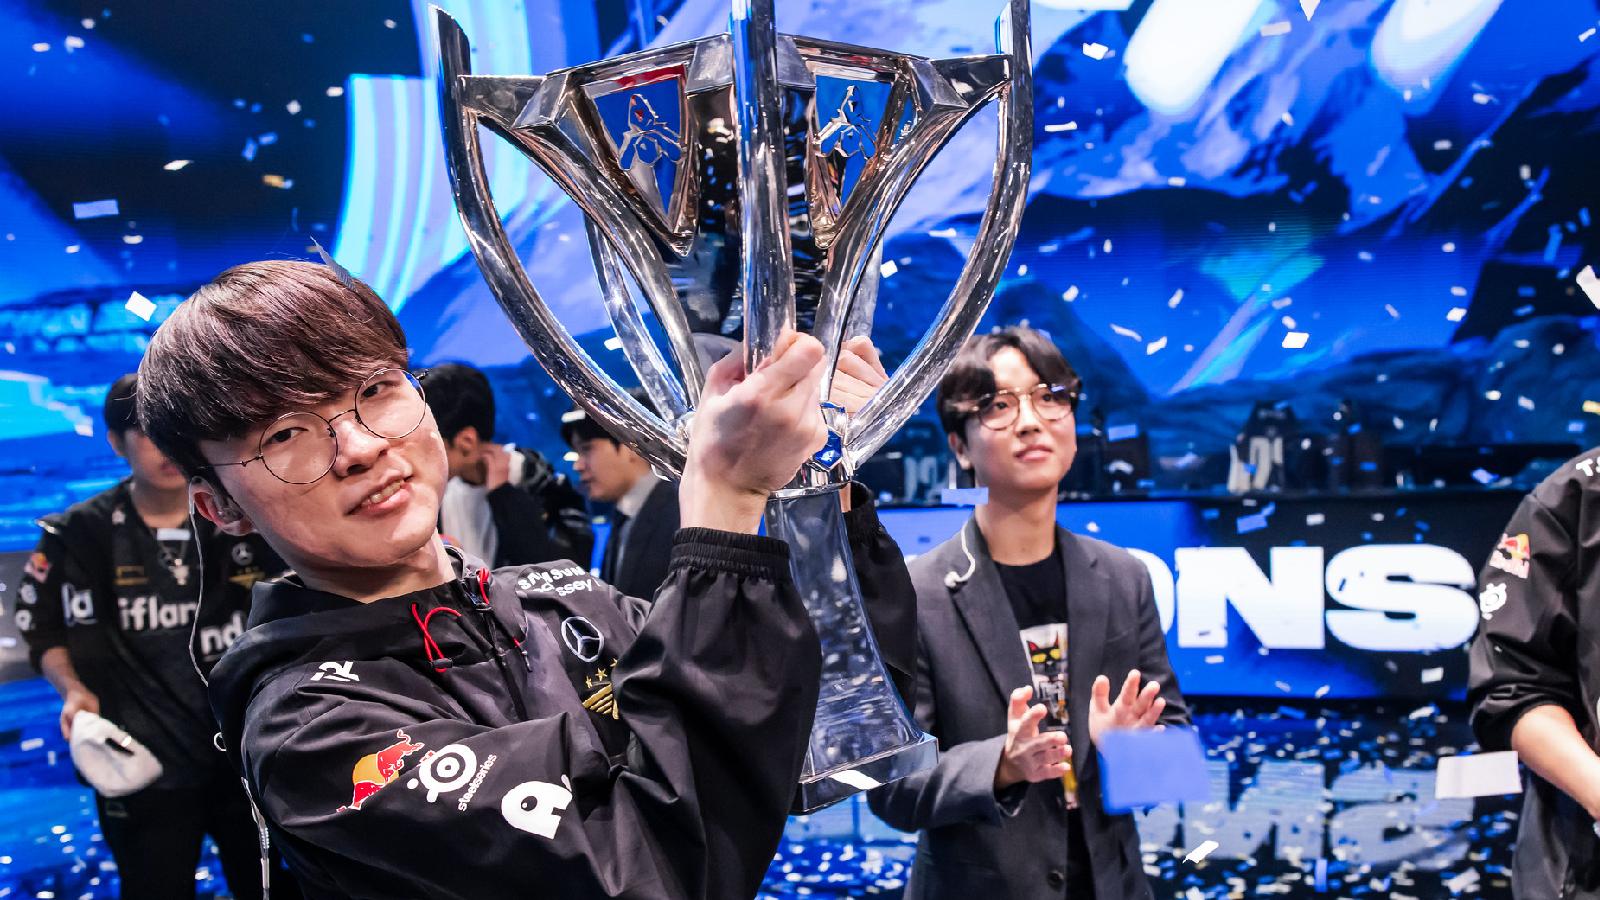 League of Legends Worlds 2023 Finals preview: Will T1 finish the